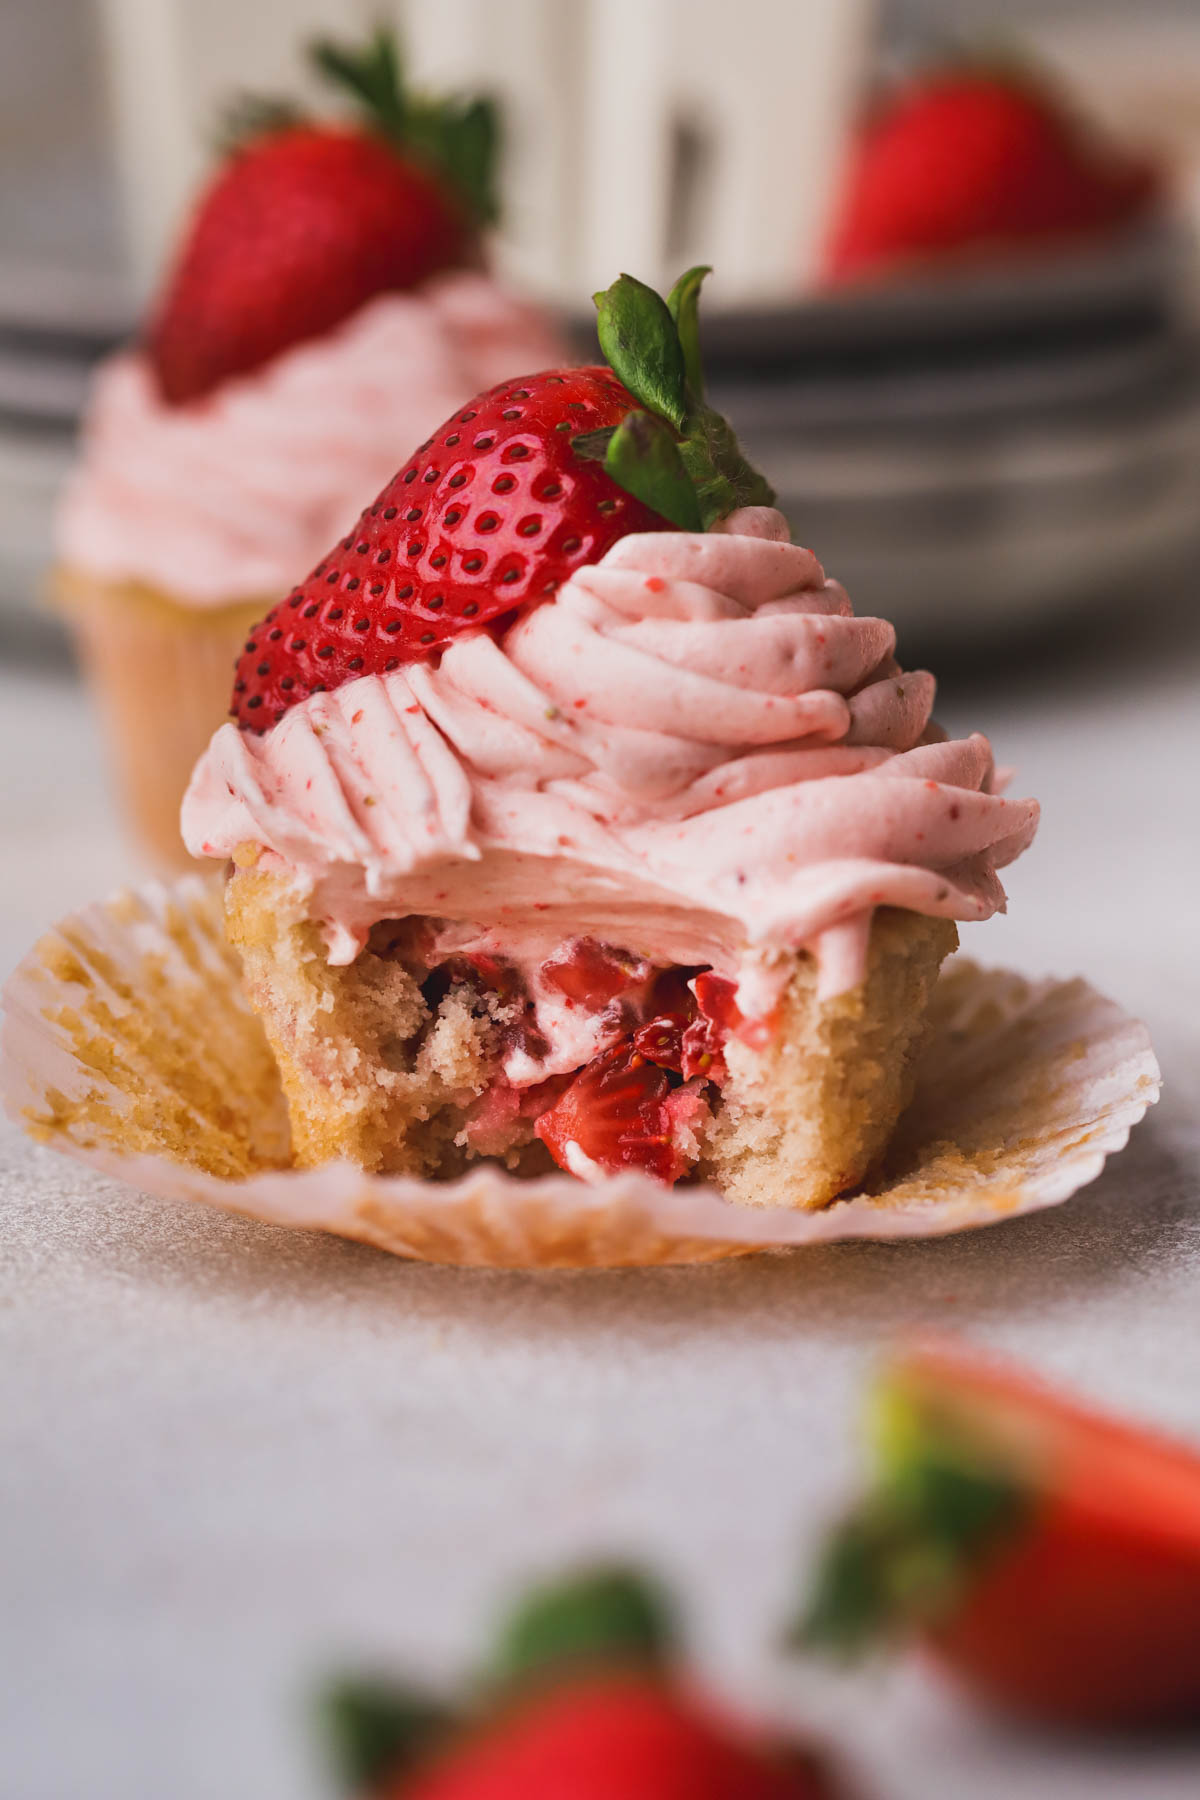 Strawberry filled cupcakes with strawberry cream cheese frosting and diced strawberries inside.  